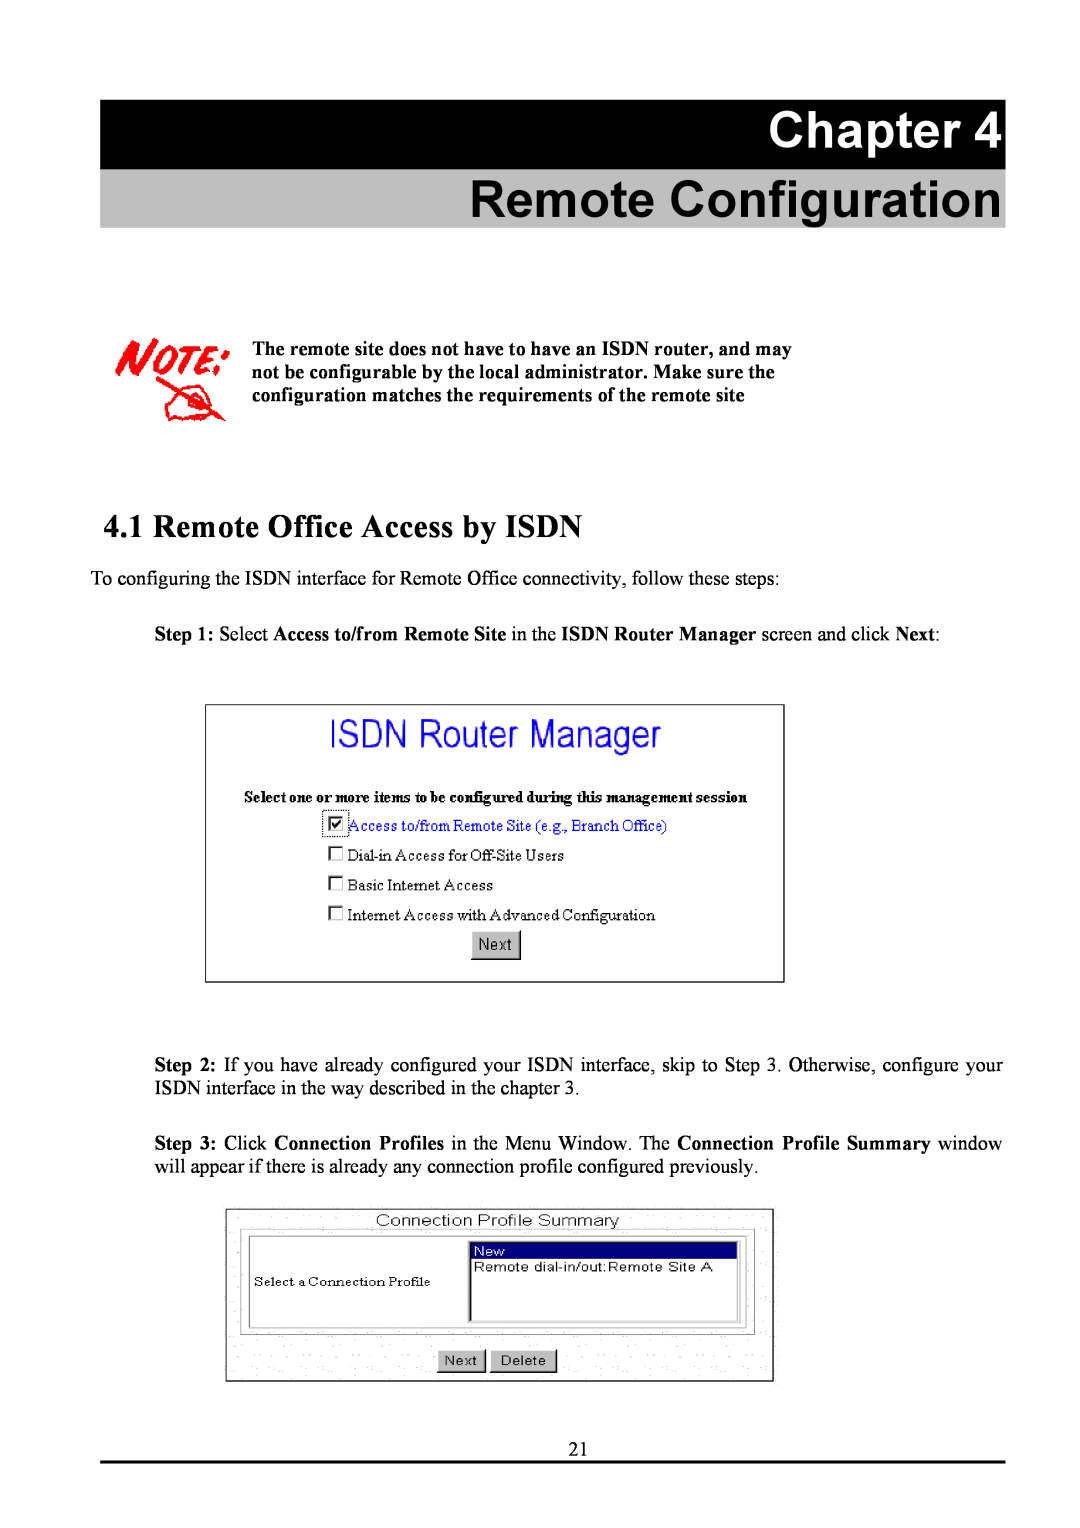 Atlantis Land ATLMMR MNE01 user manual Remote Configuration, Remote Office Access by ISDN, Chapter 